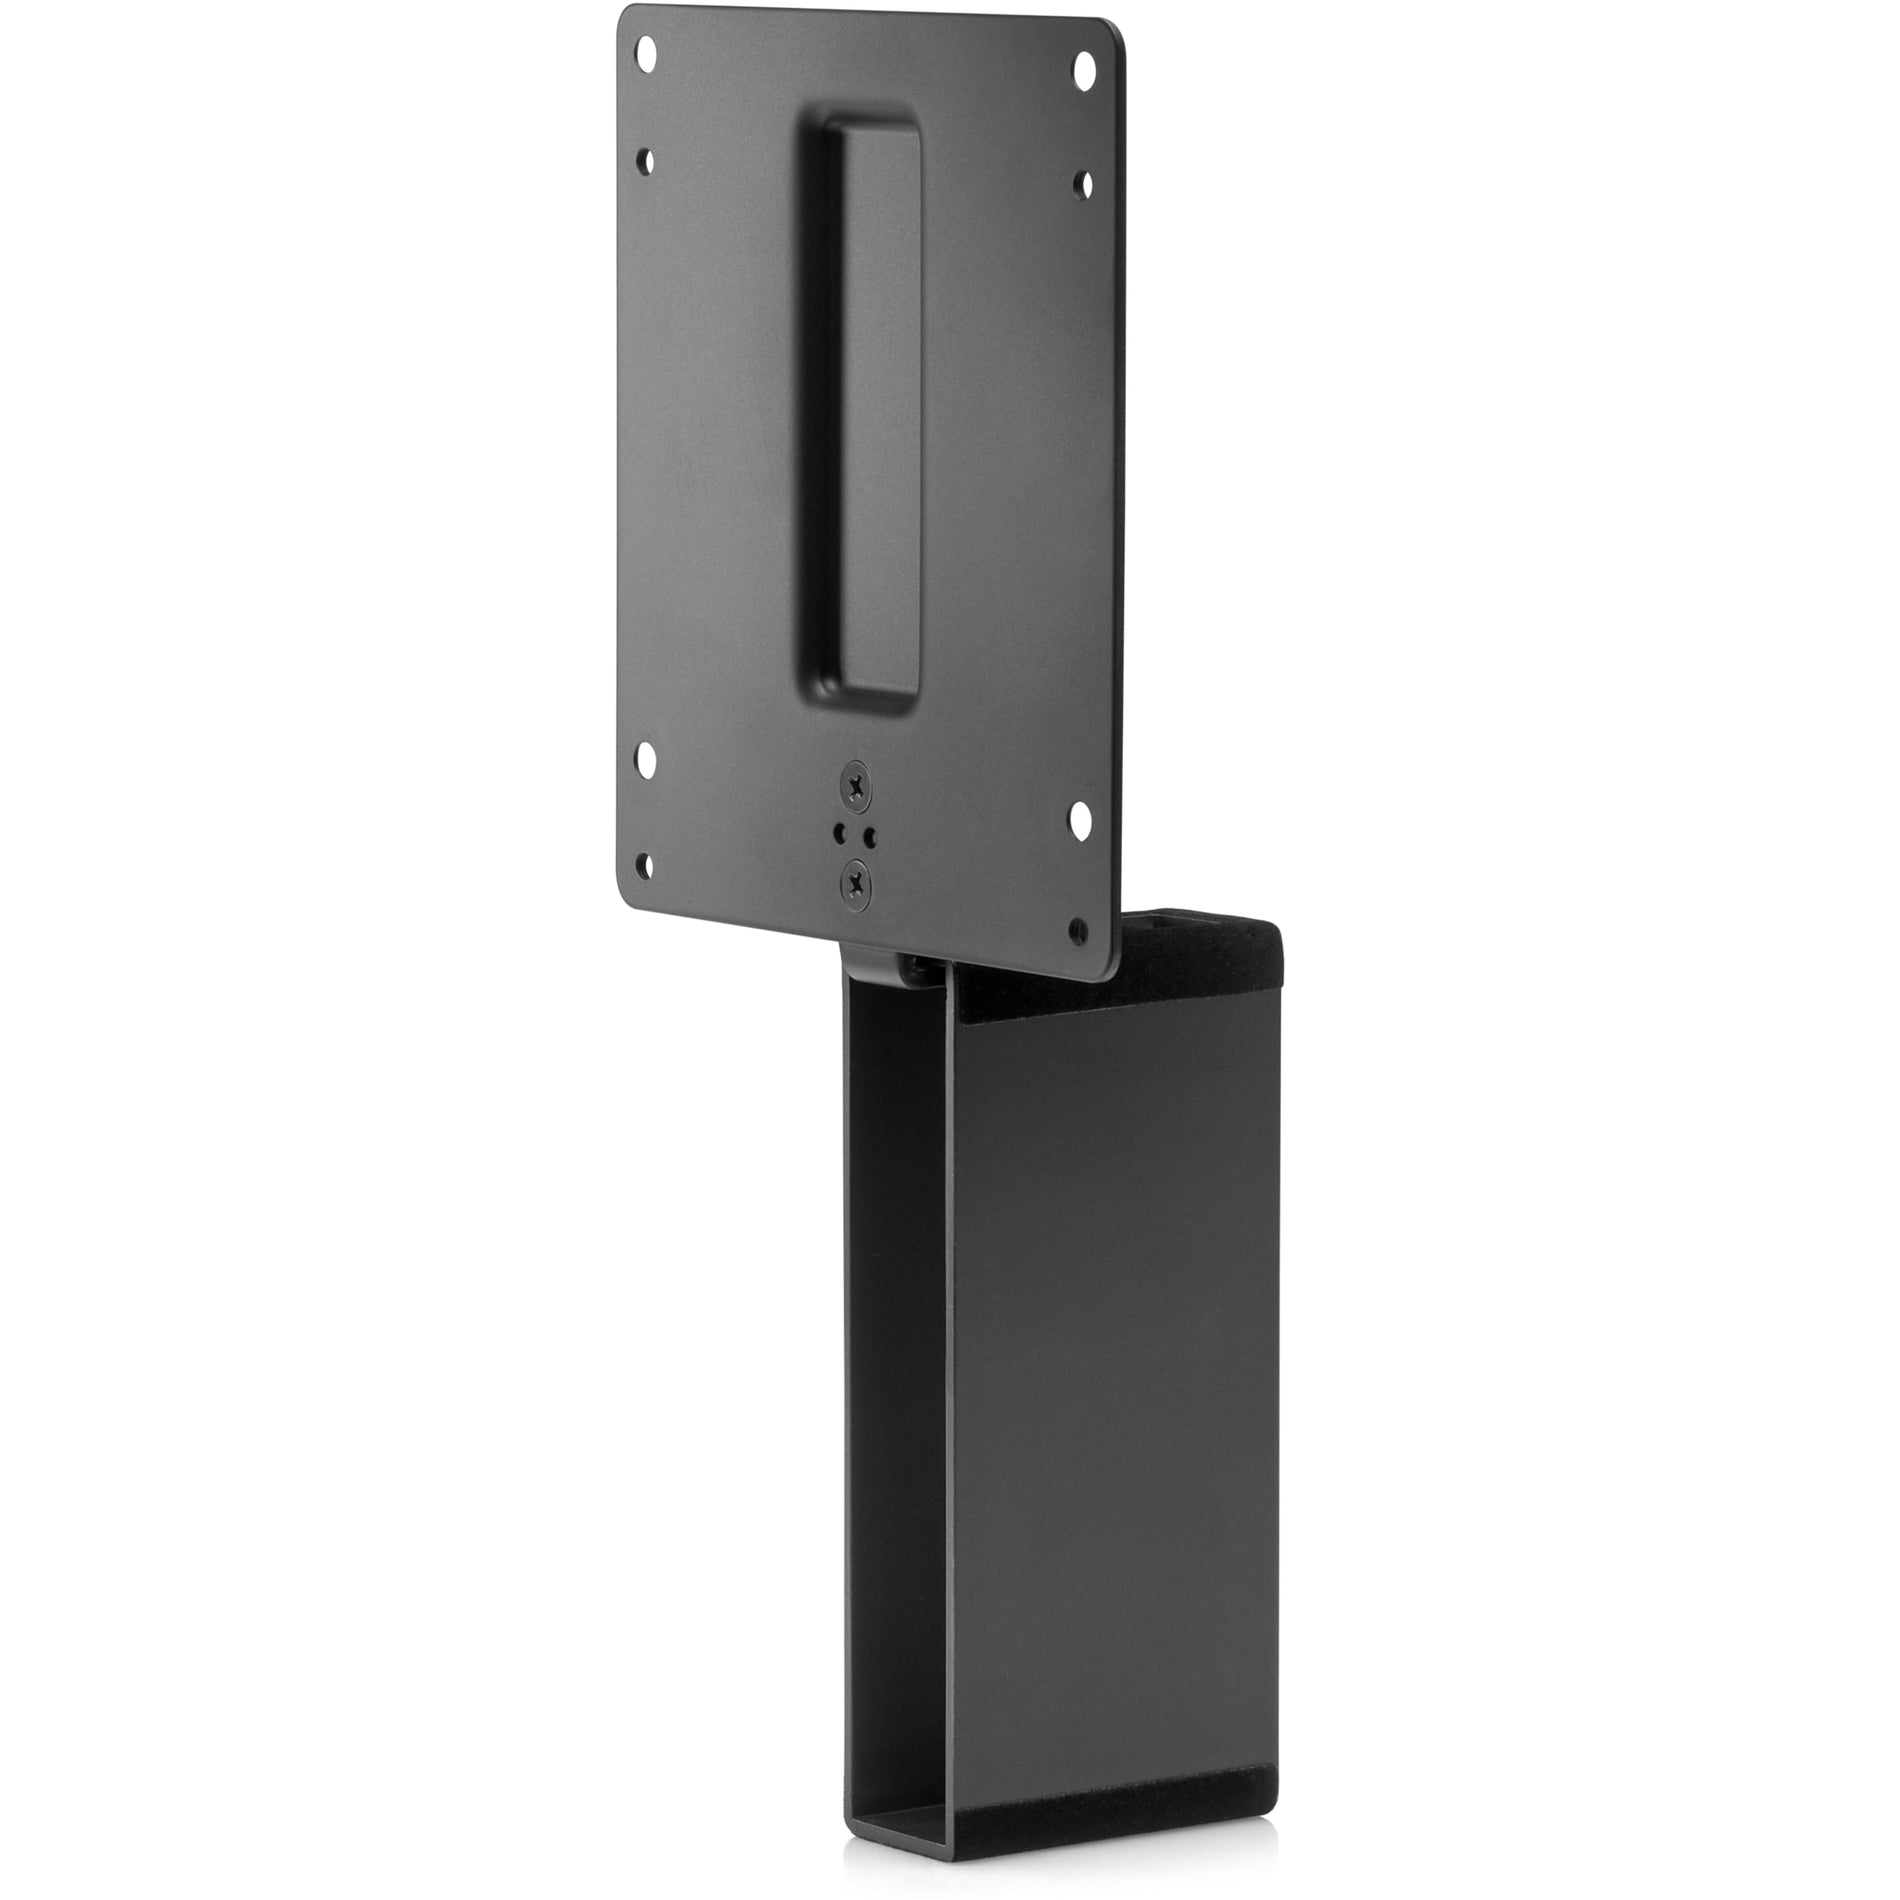 HP B500 Mounting Bracket for Thin Client and Computer - Black [Discontinued]